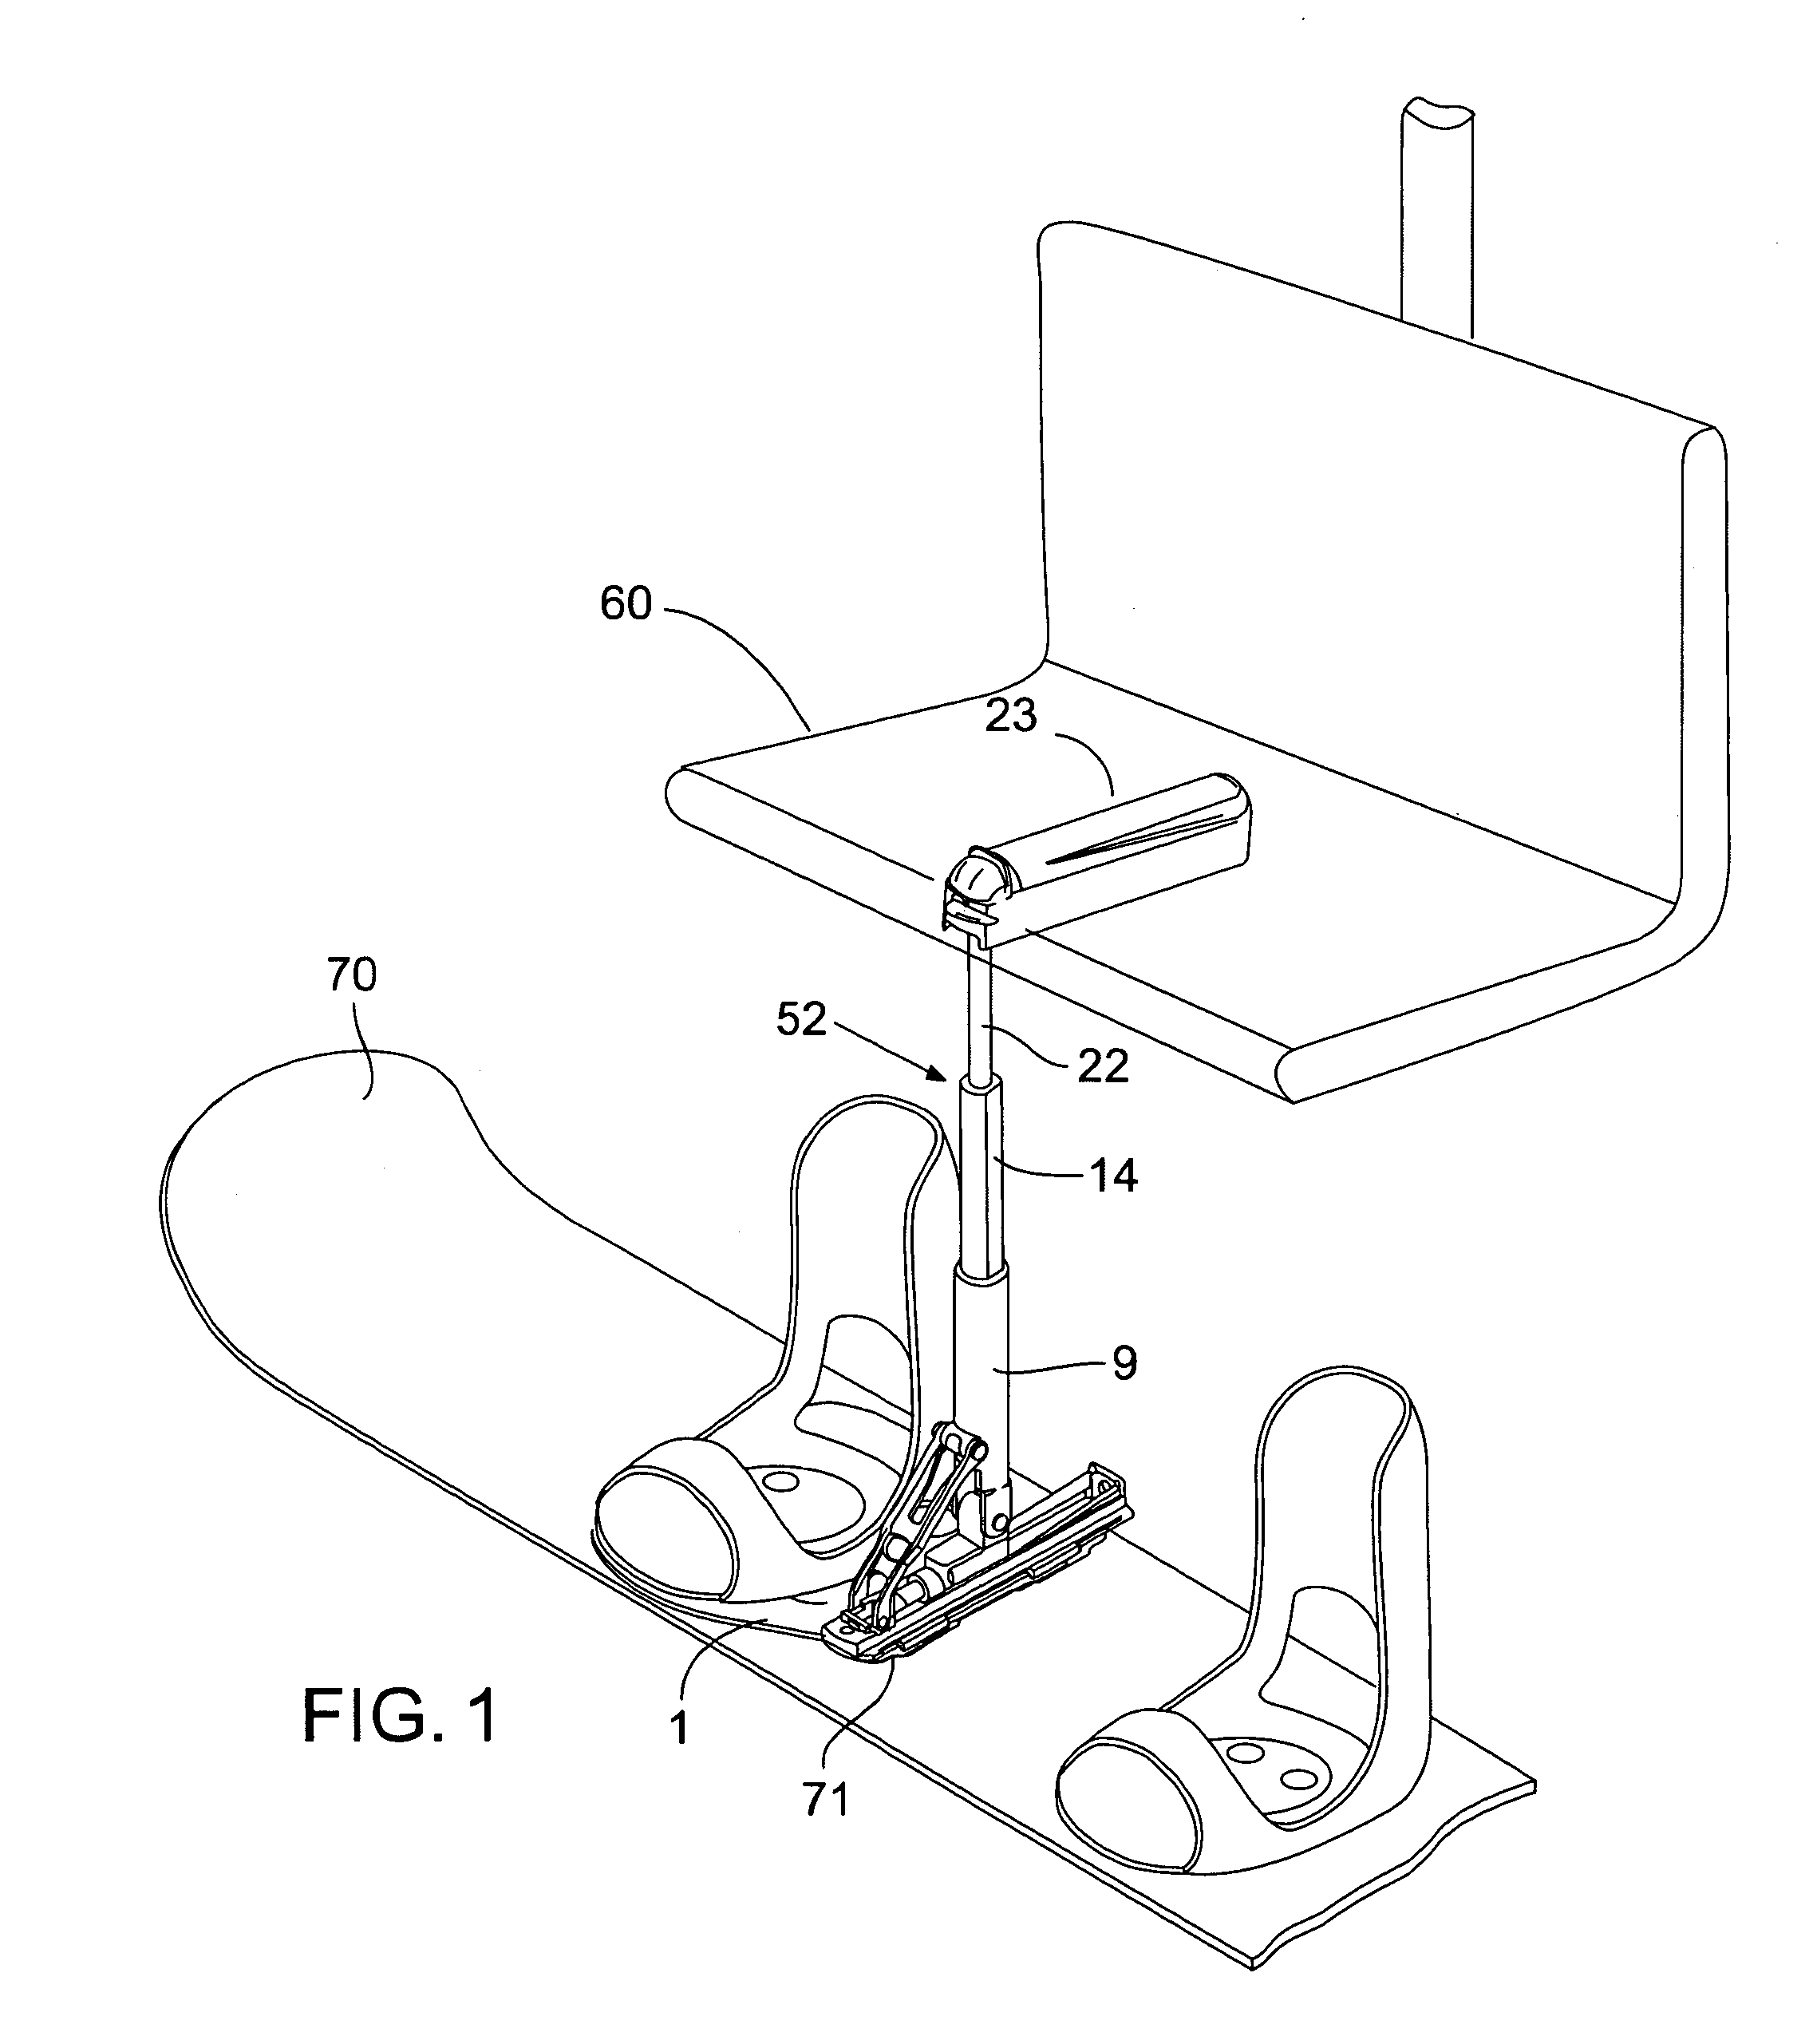 Retractable snowboard support apparatus for use in lift assist transport